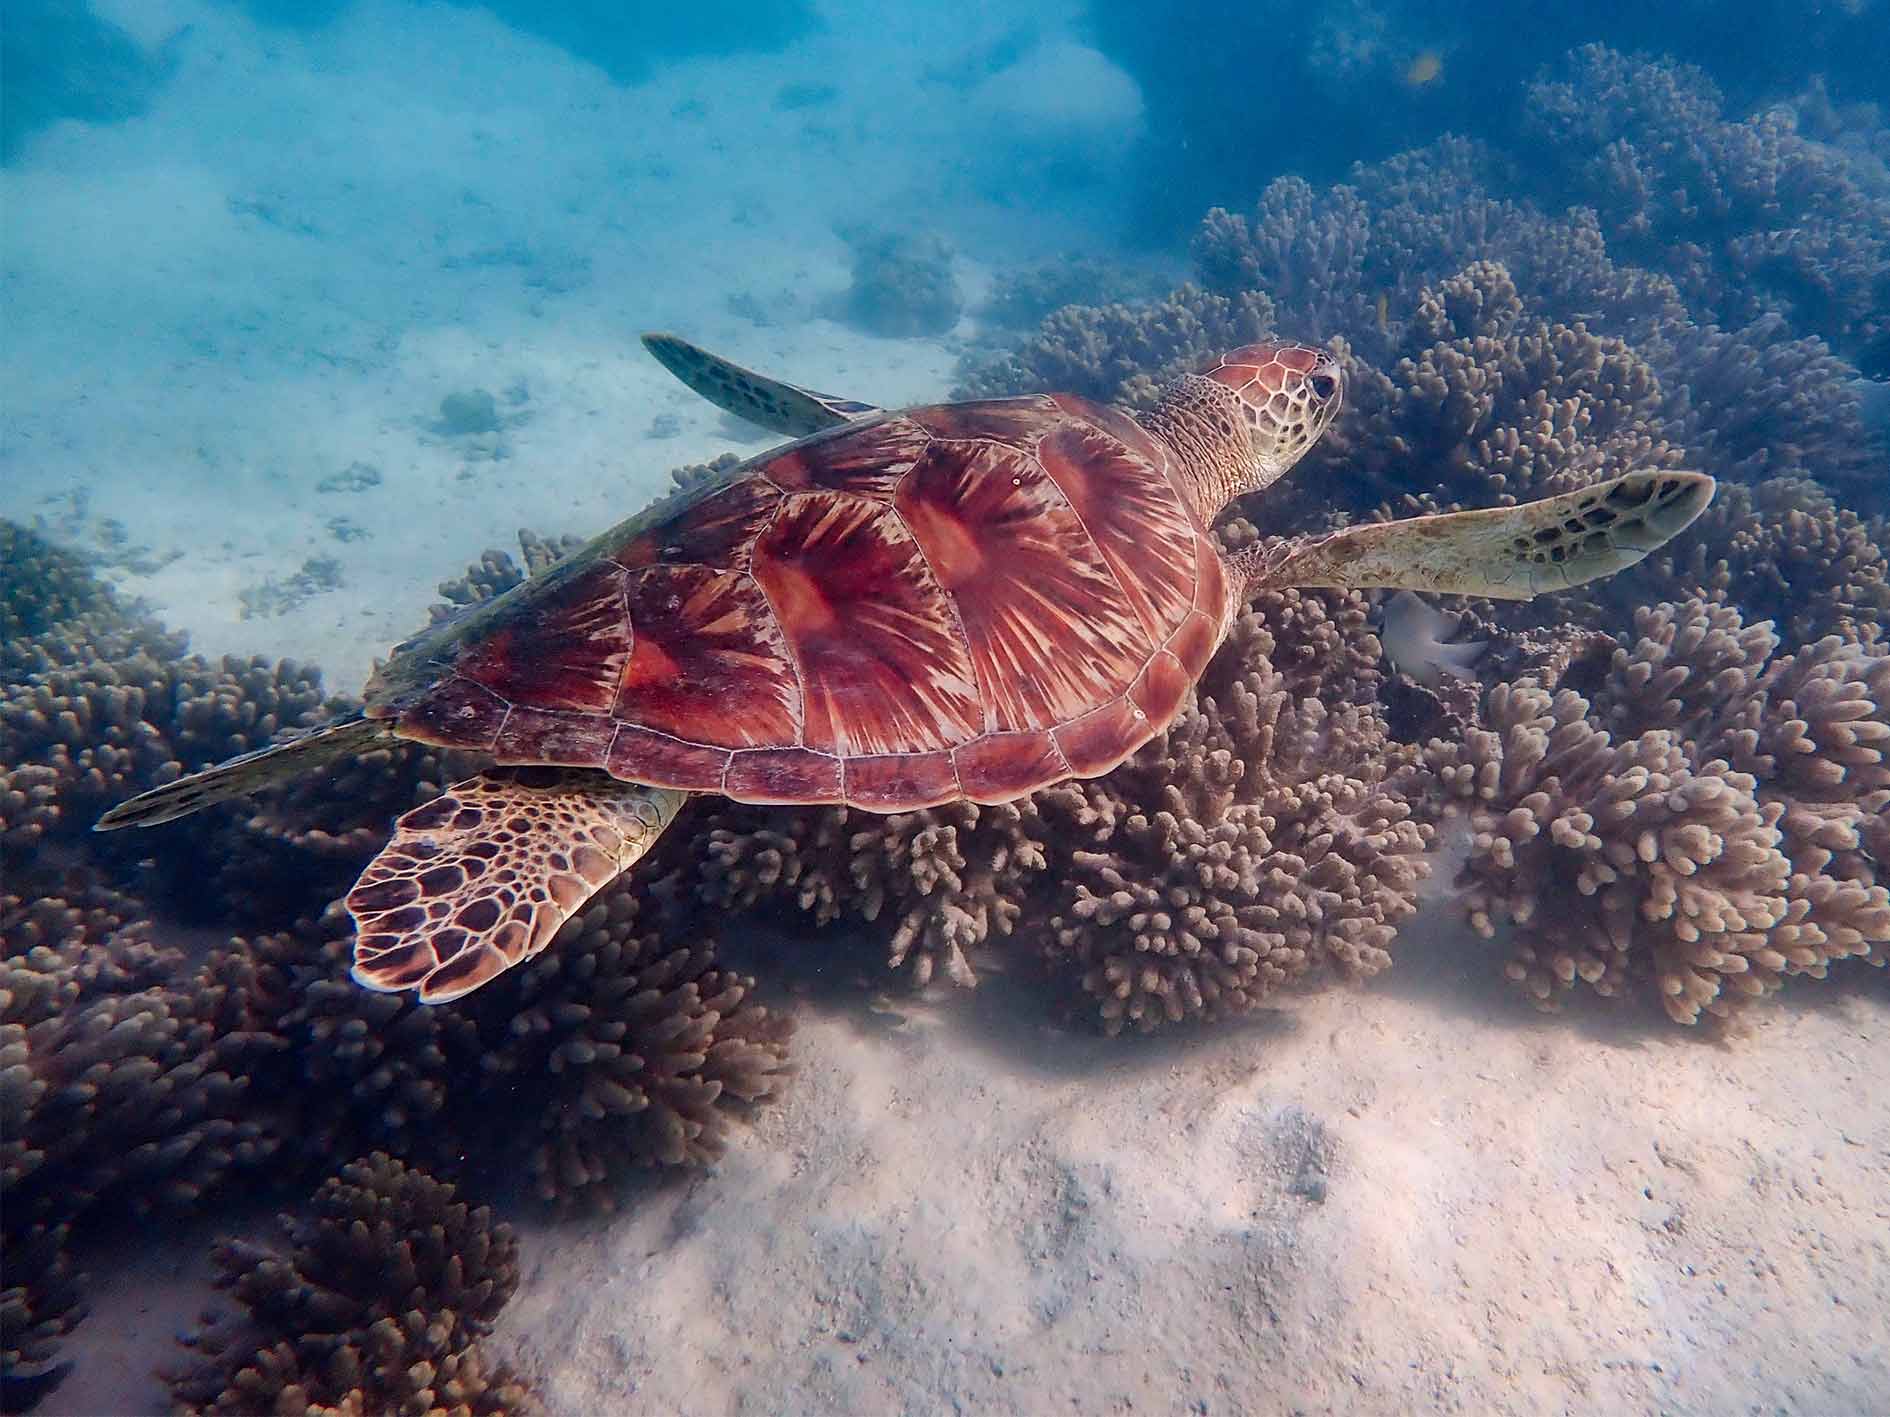 Snorkelling with a turtle at Ningaloo reef